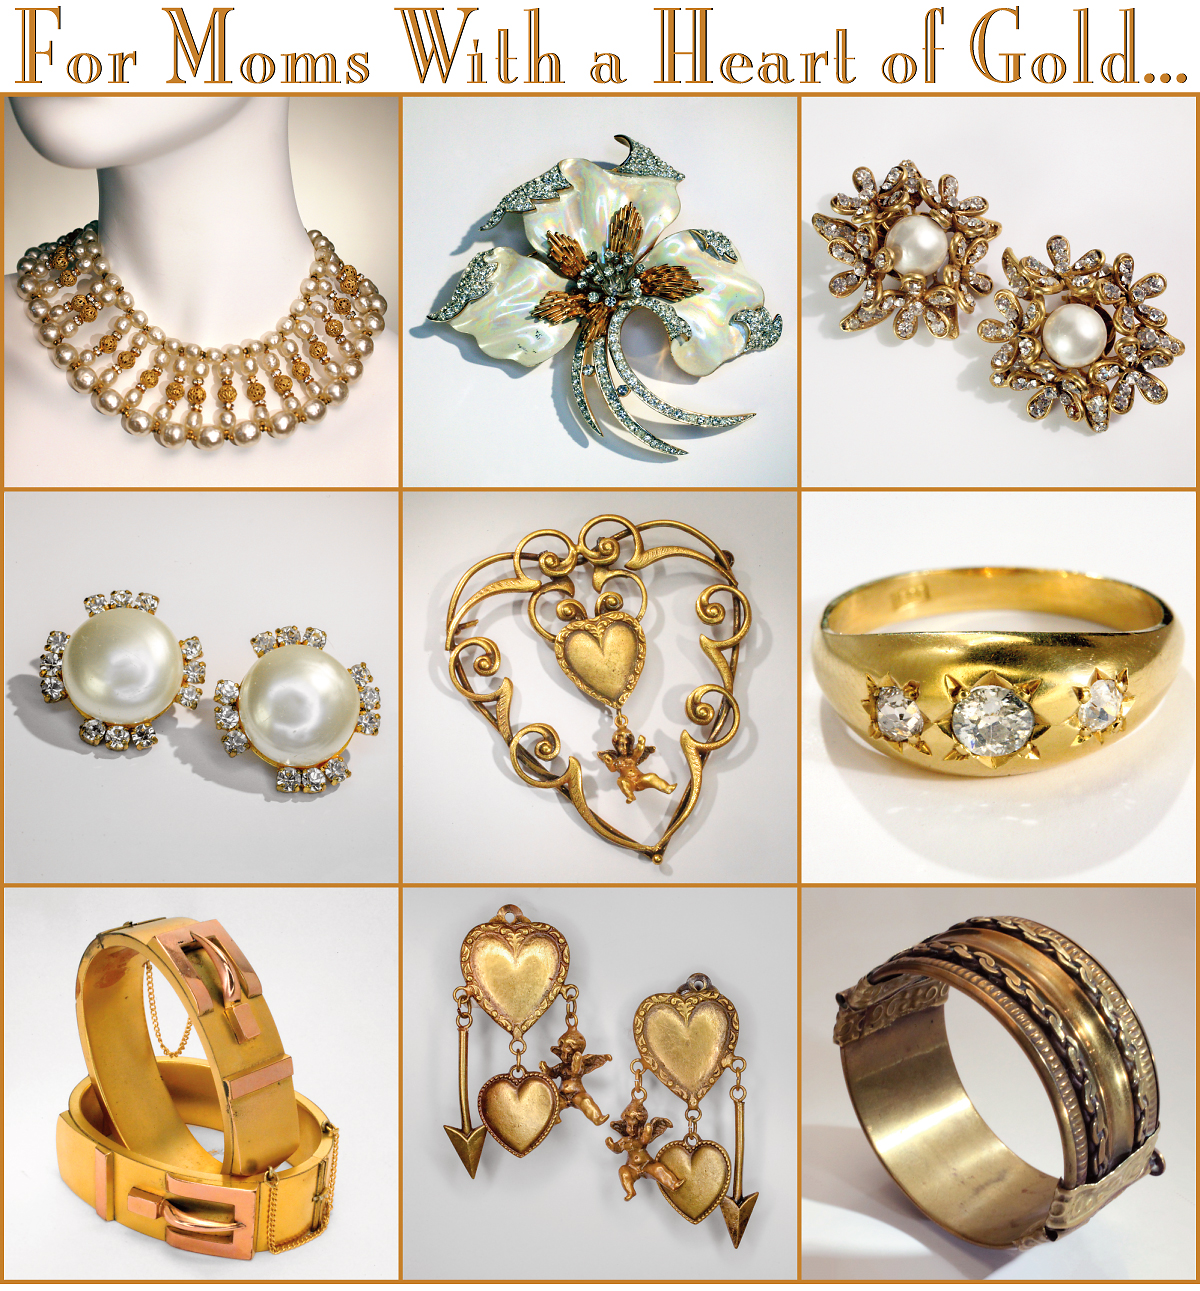 For Moms With a Heart of Gold...